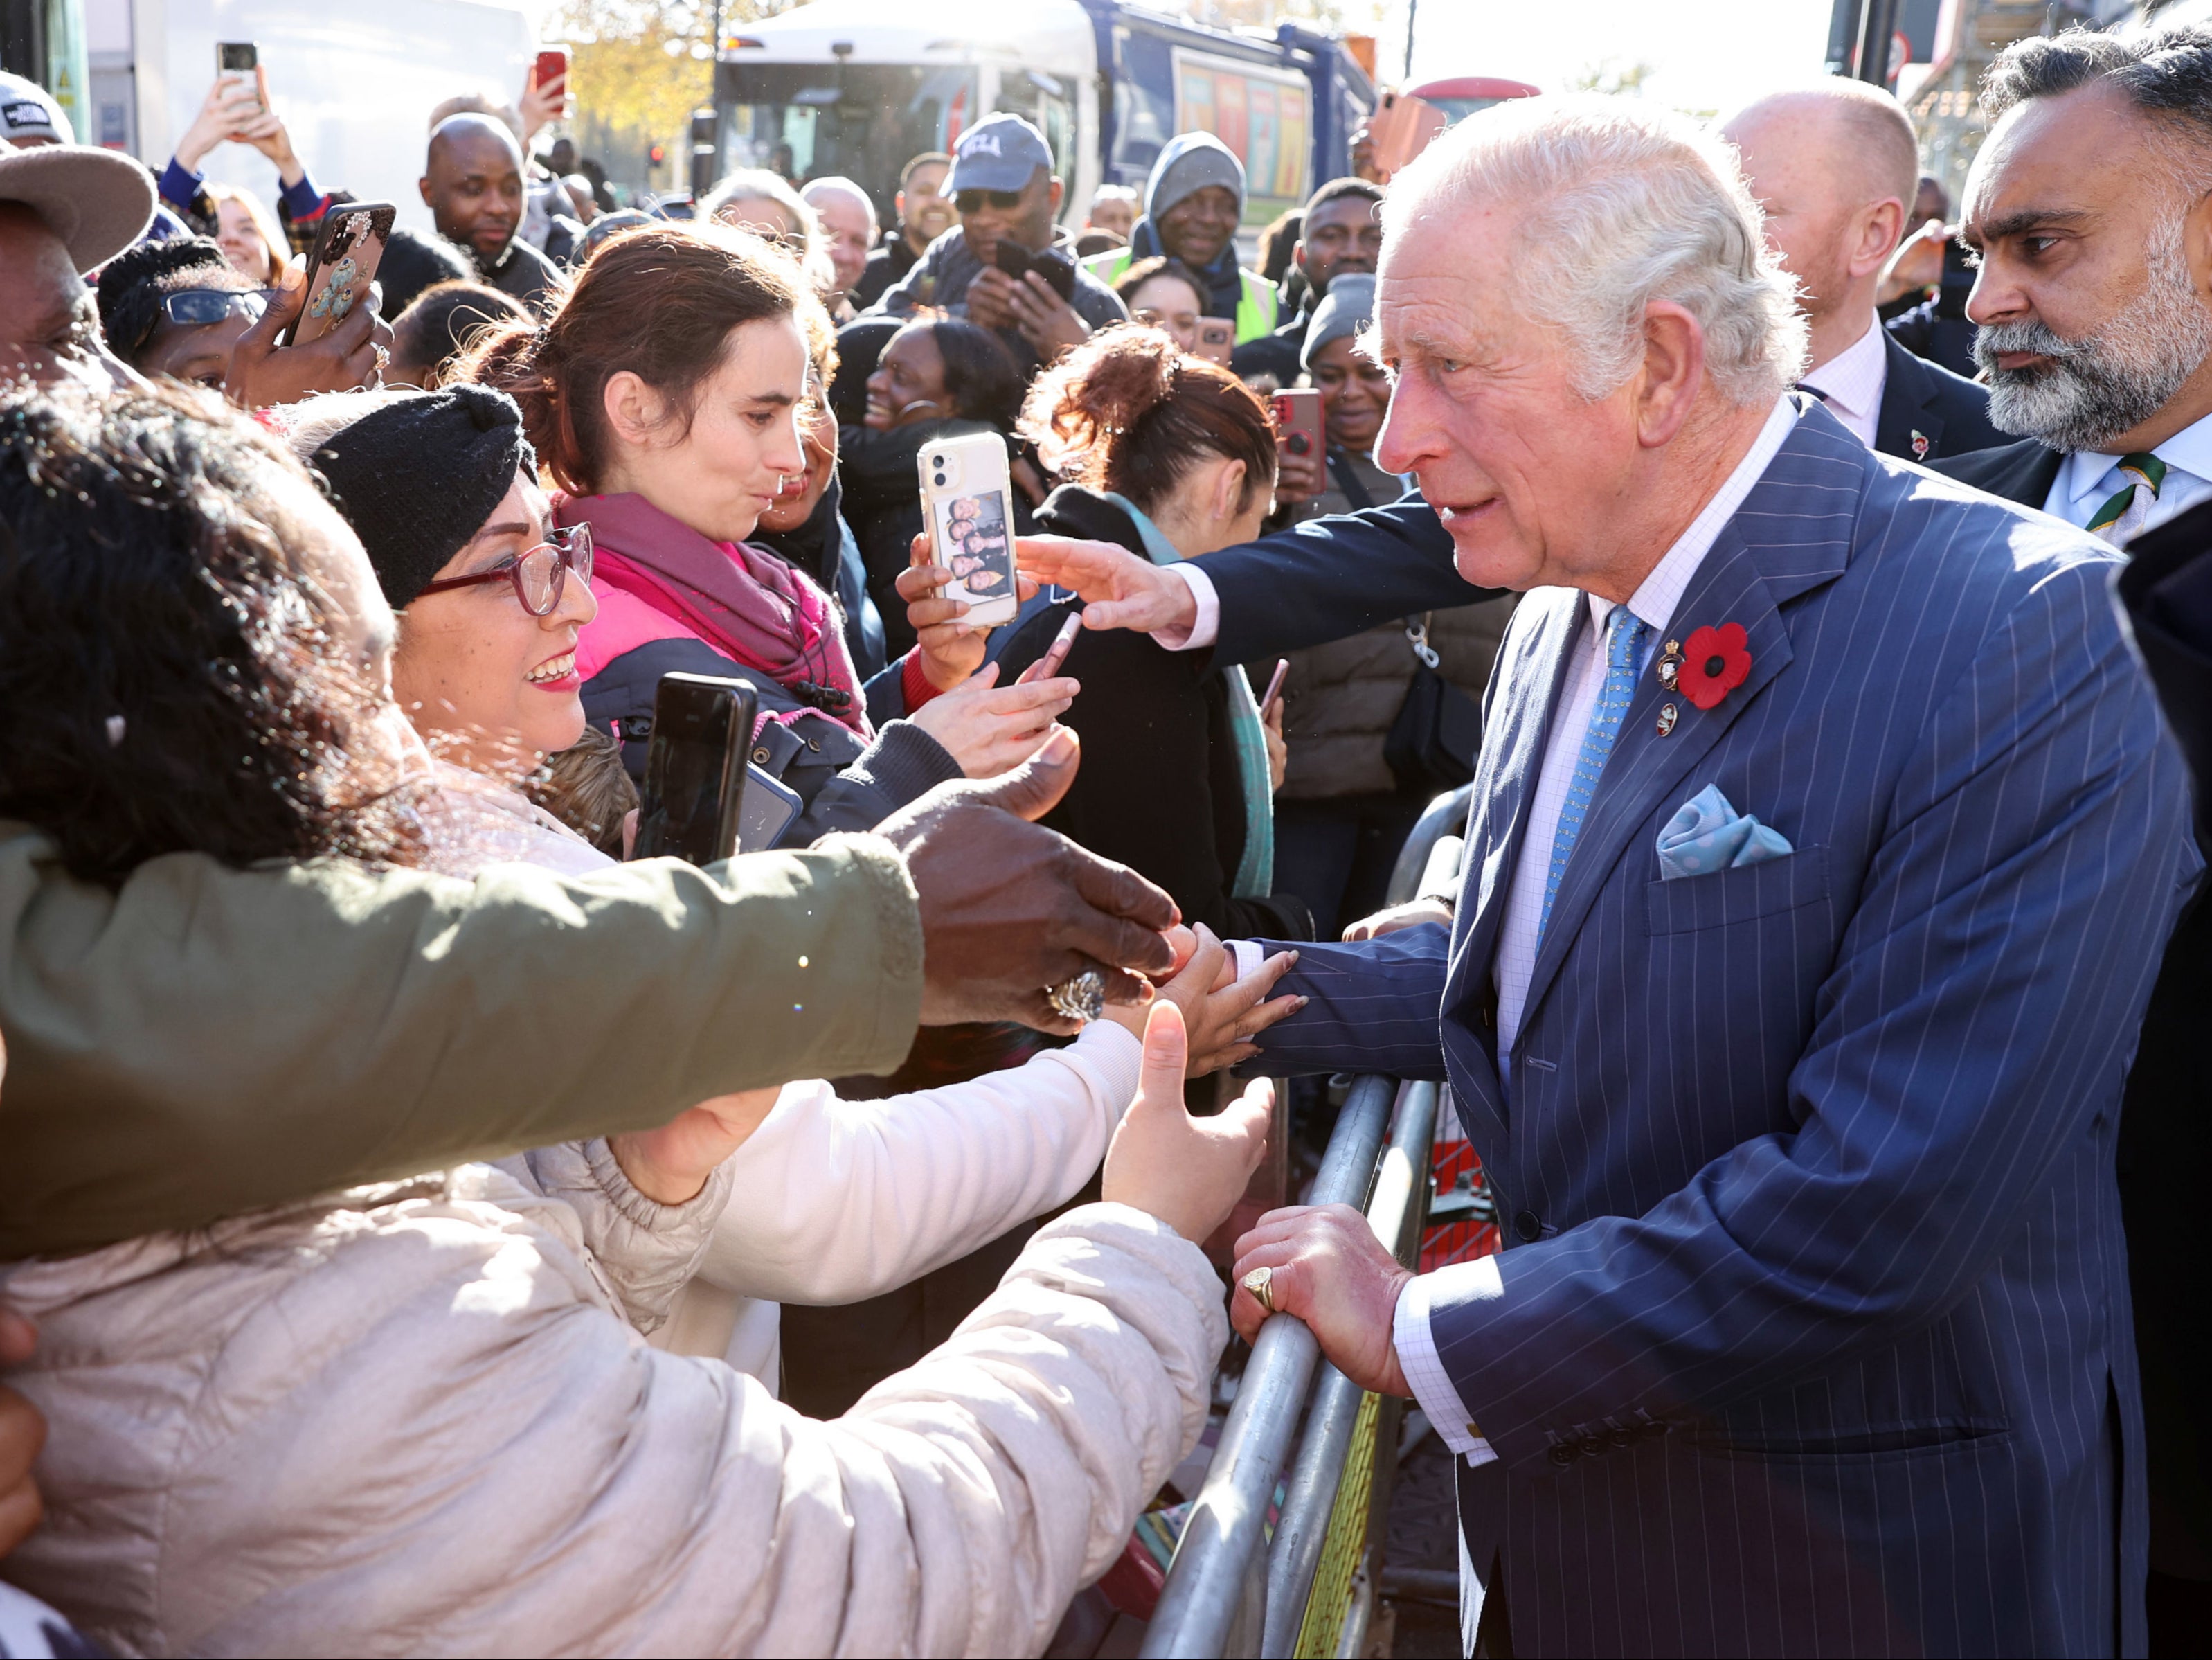 The Prince of Wales (right) meets members of the public as he departs a visit to meet Prince's Trust Young Entrepreneurs, supported through the Enterprise programme at NatWest, in London